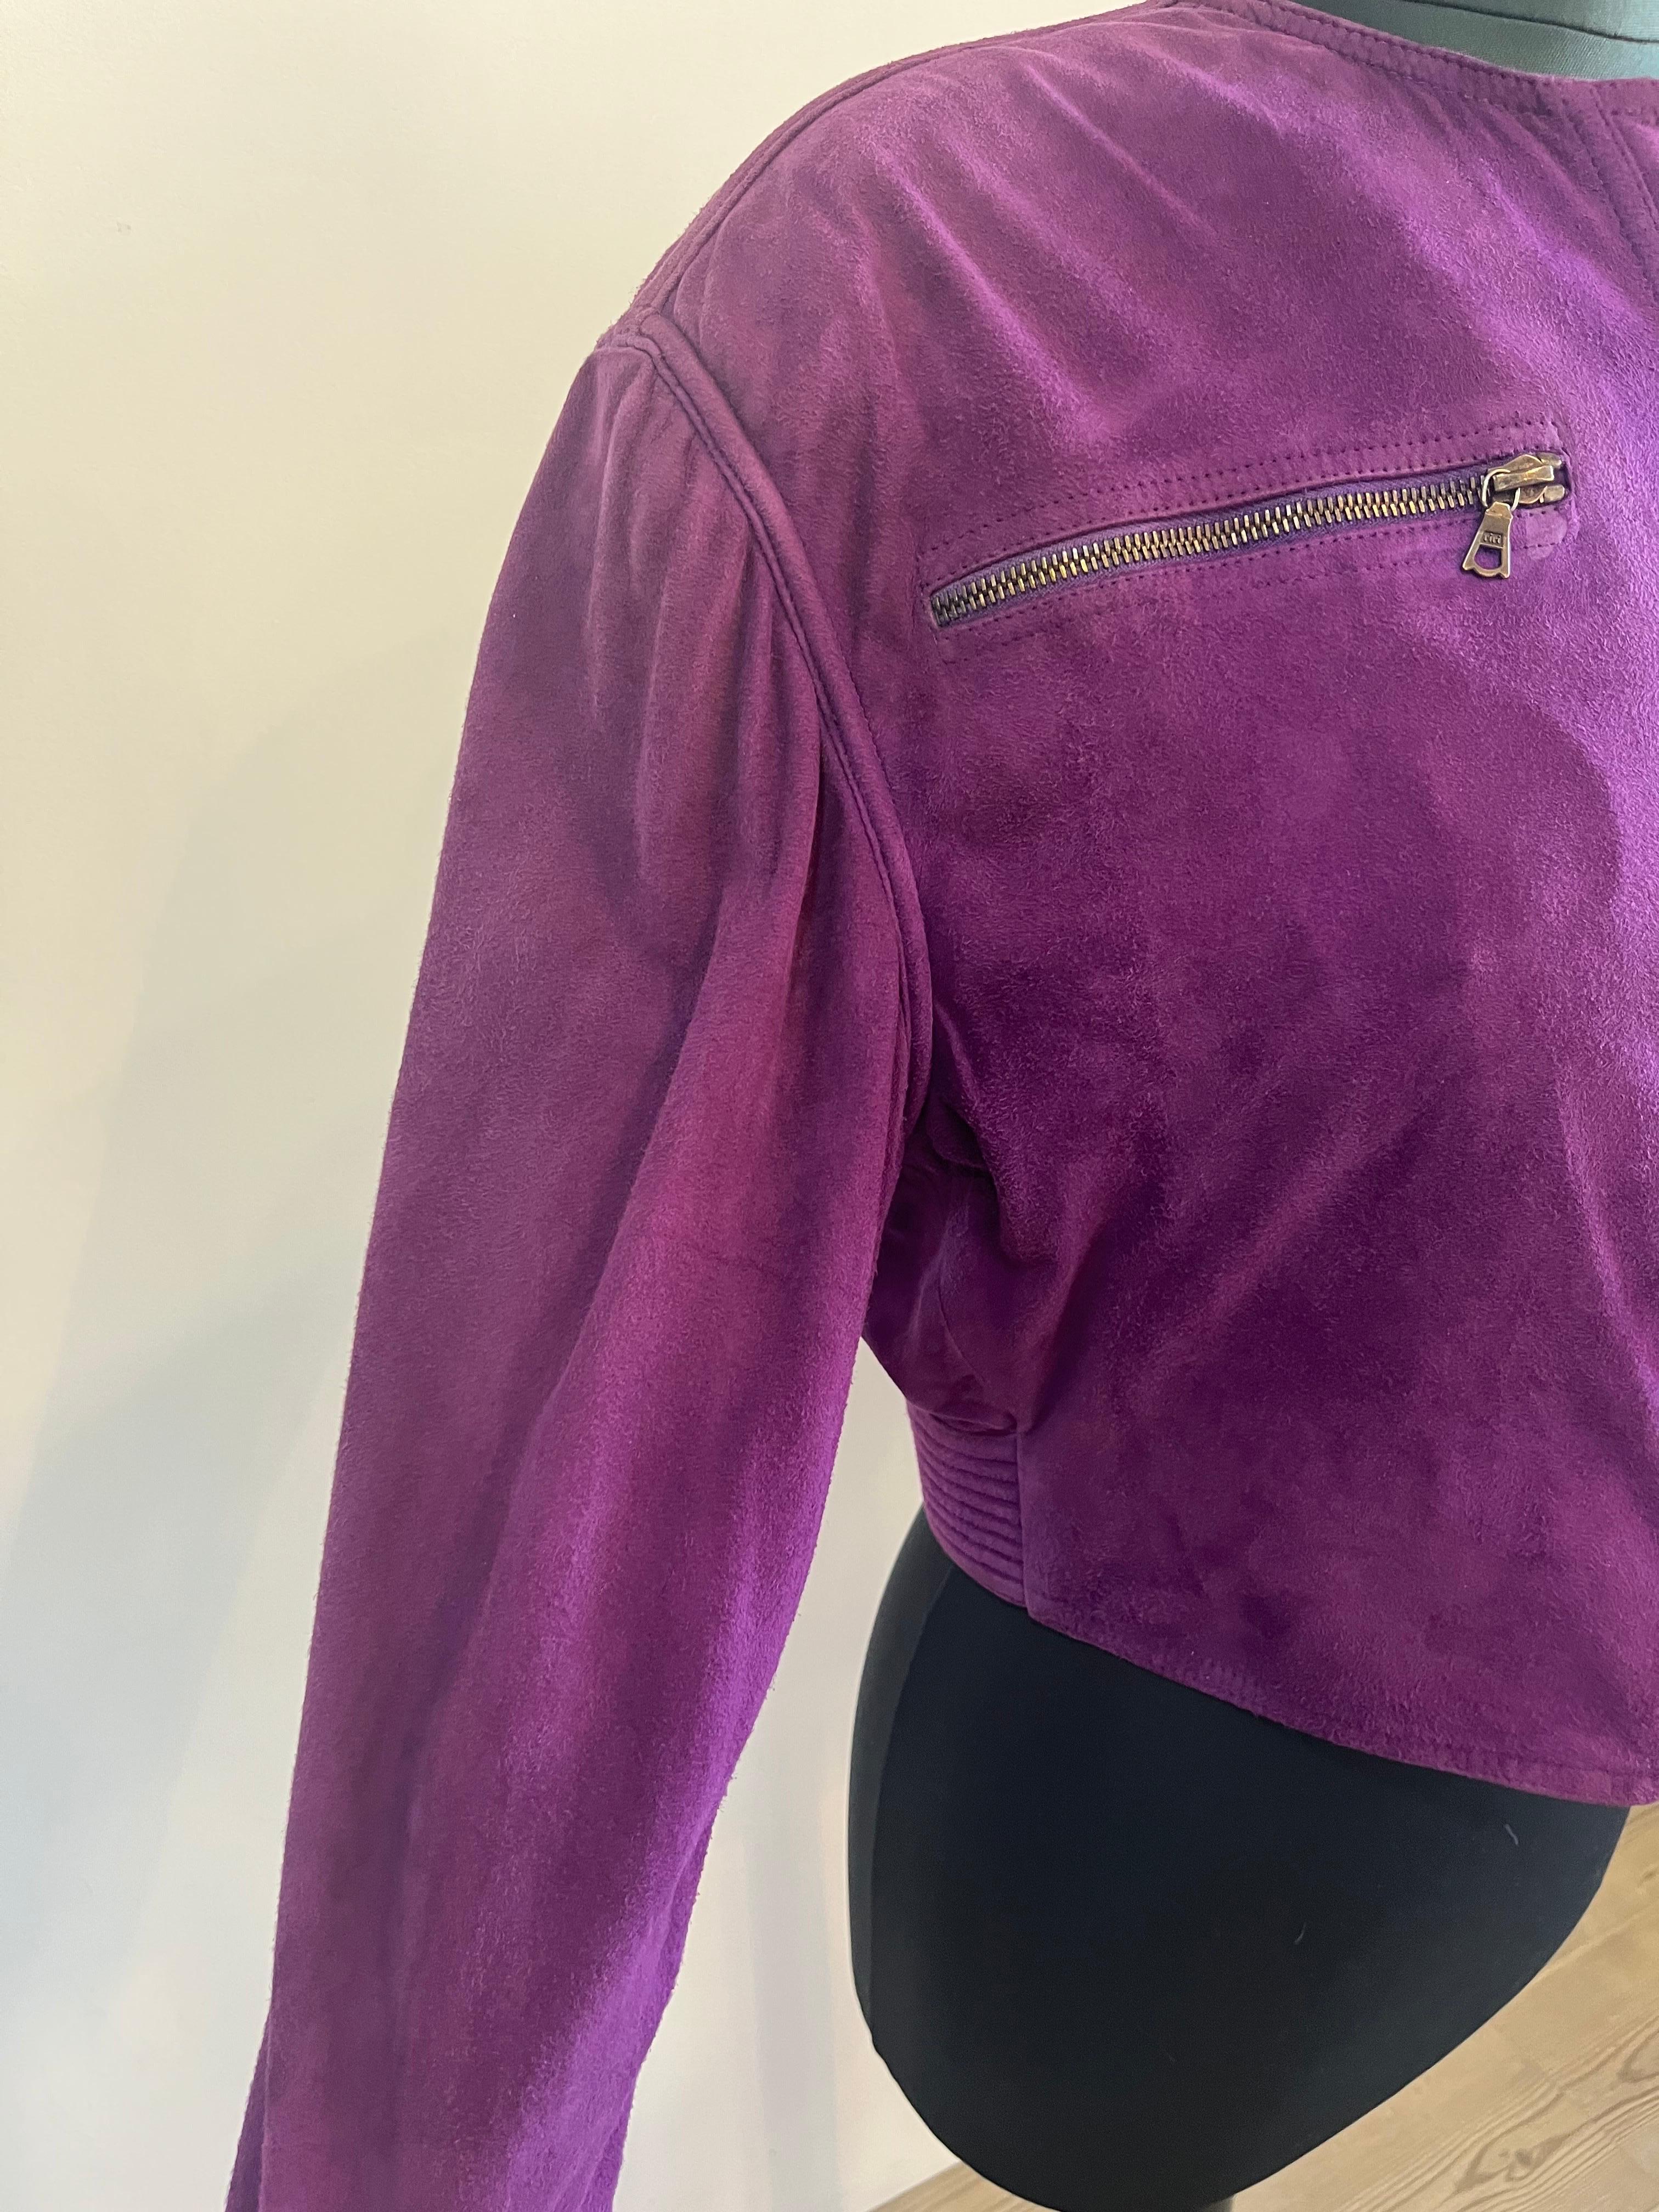 Gianni Versace vintage jacket from 80s In Good Condition For Sale In Carnate, IT